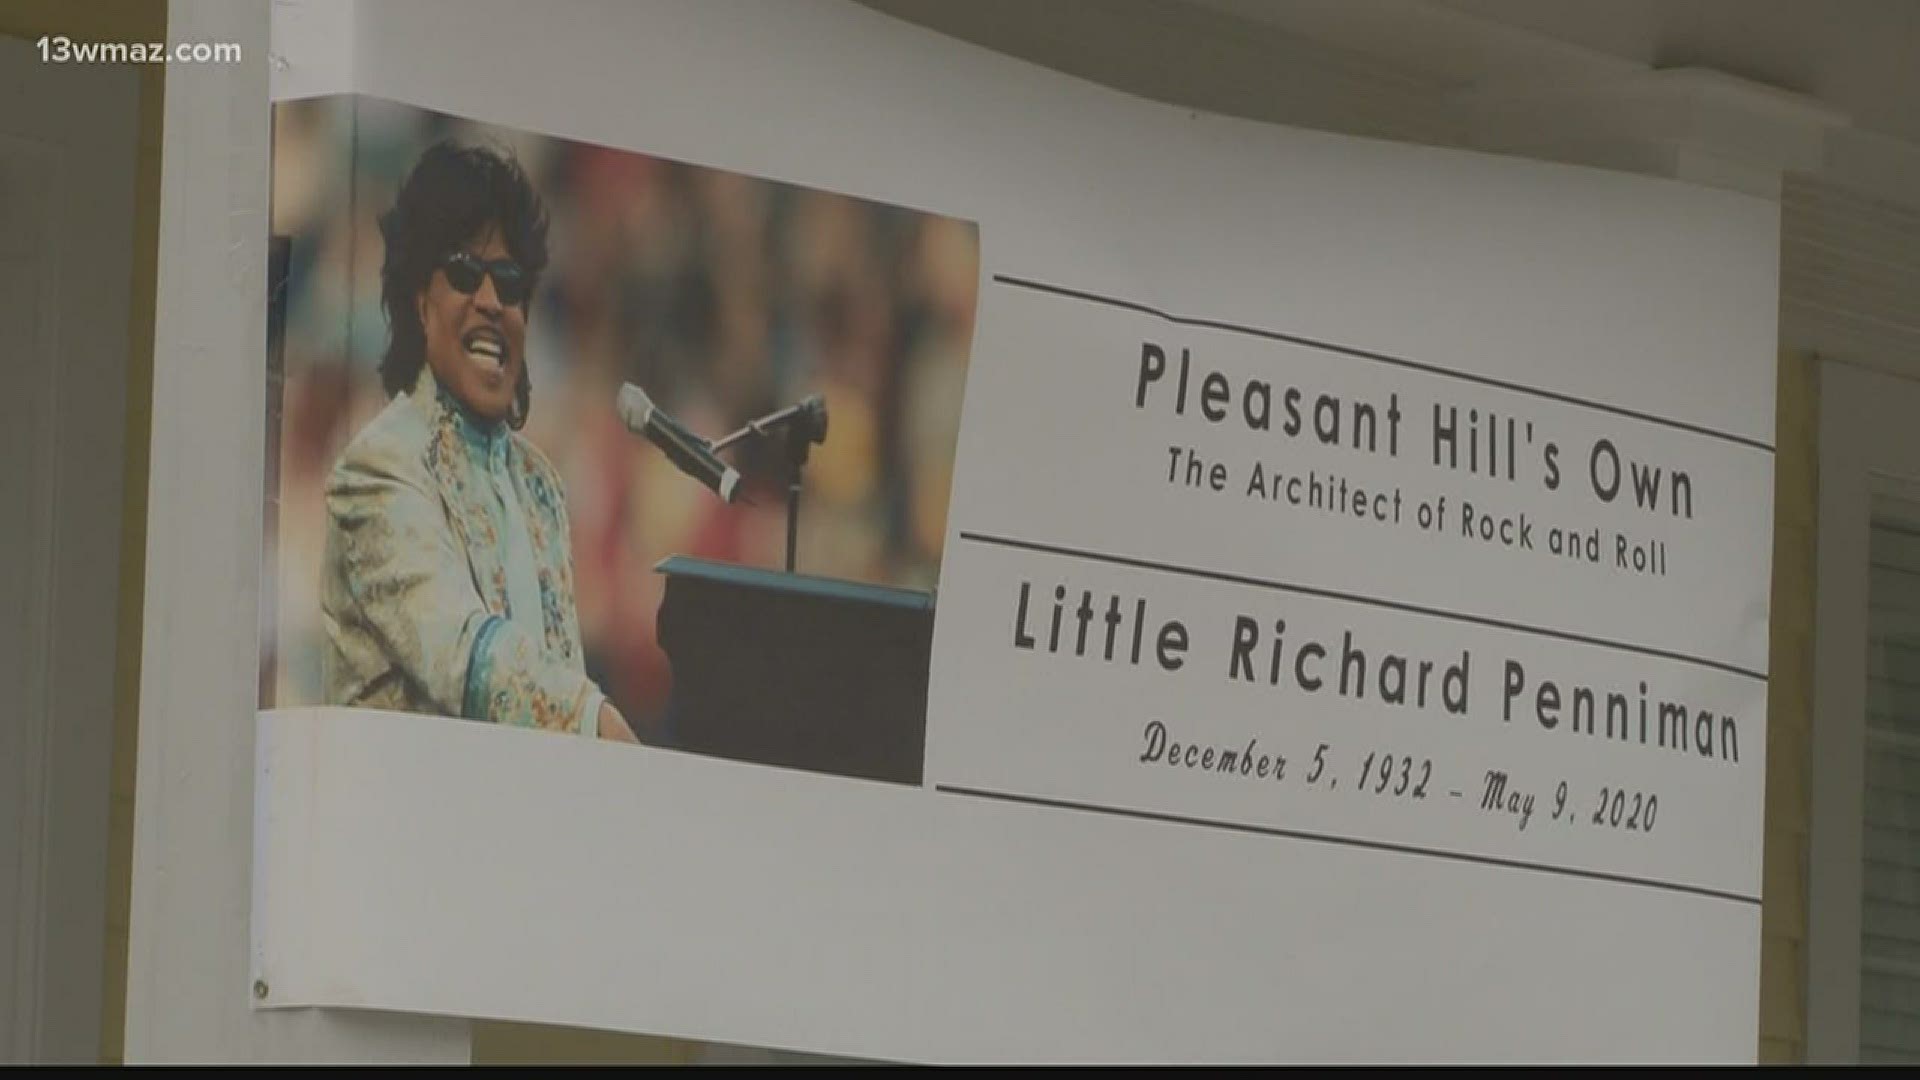 Wednesday, Friends of the Little Richard House announced new plans to honor him.
Here's what community members say about their tribute to the music legend.